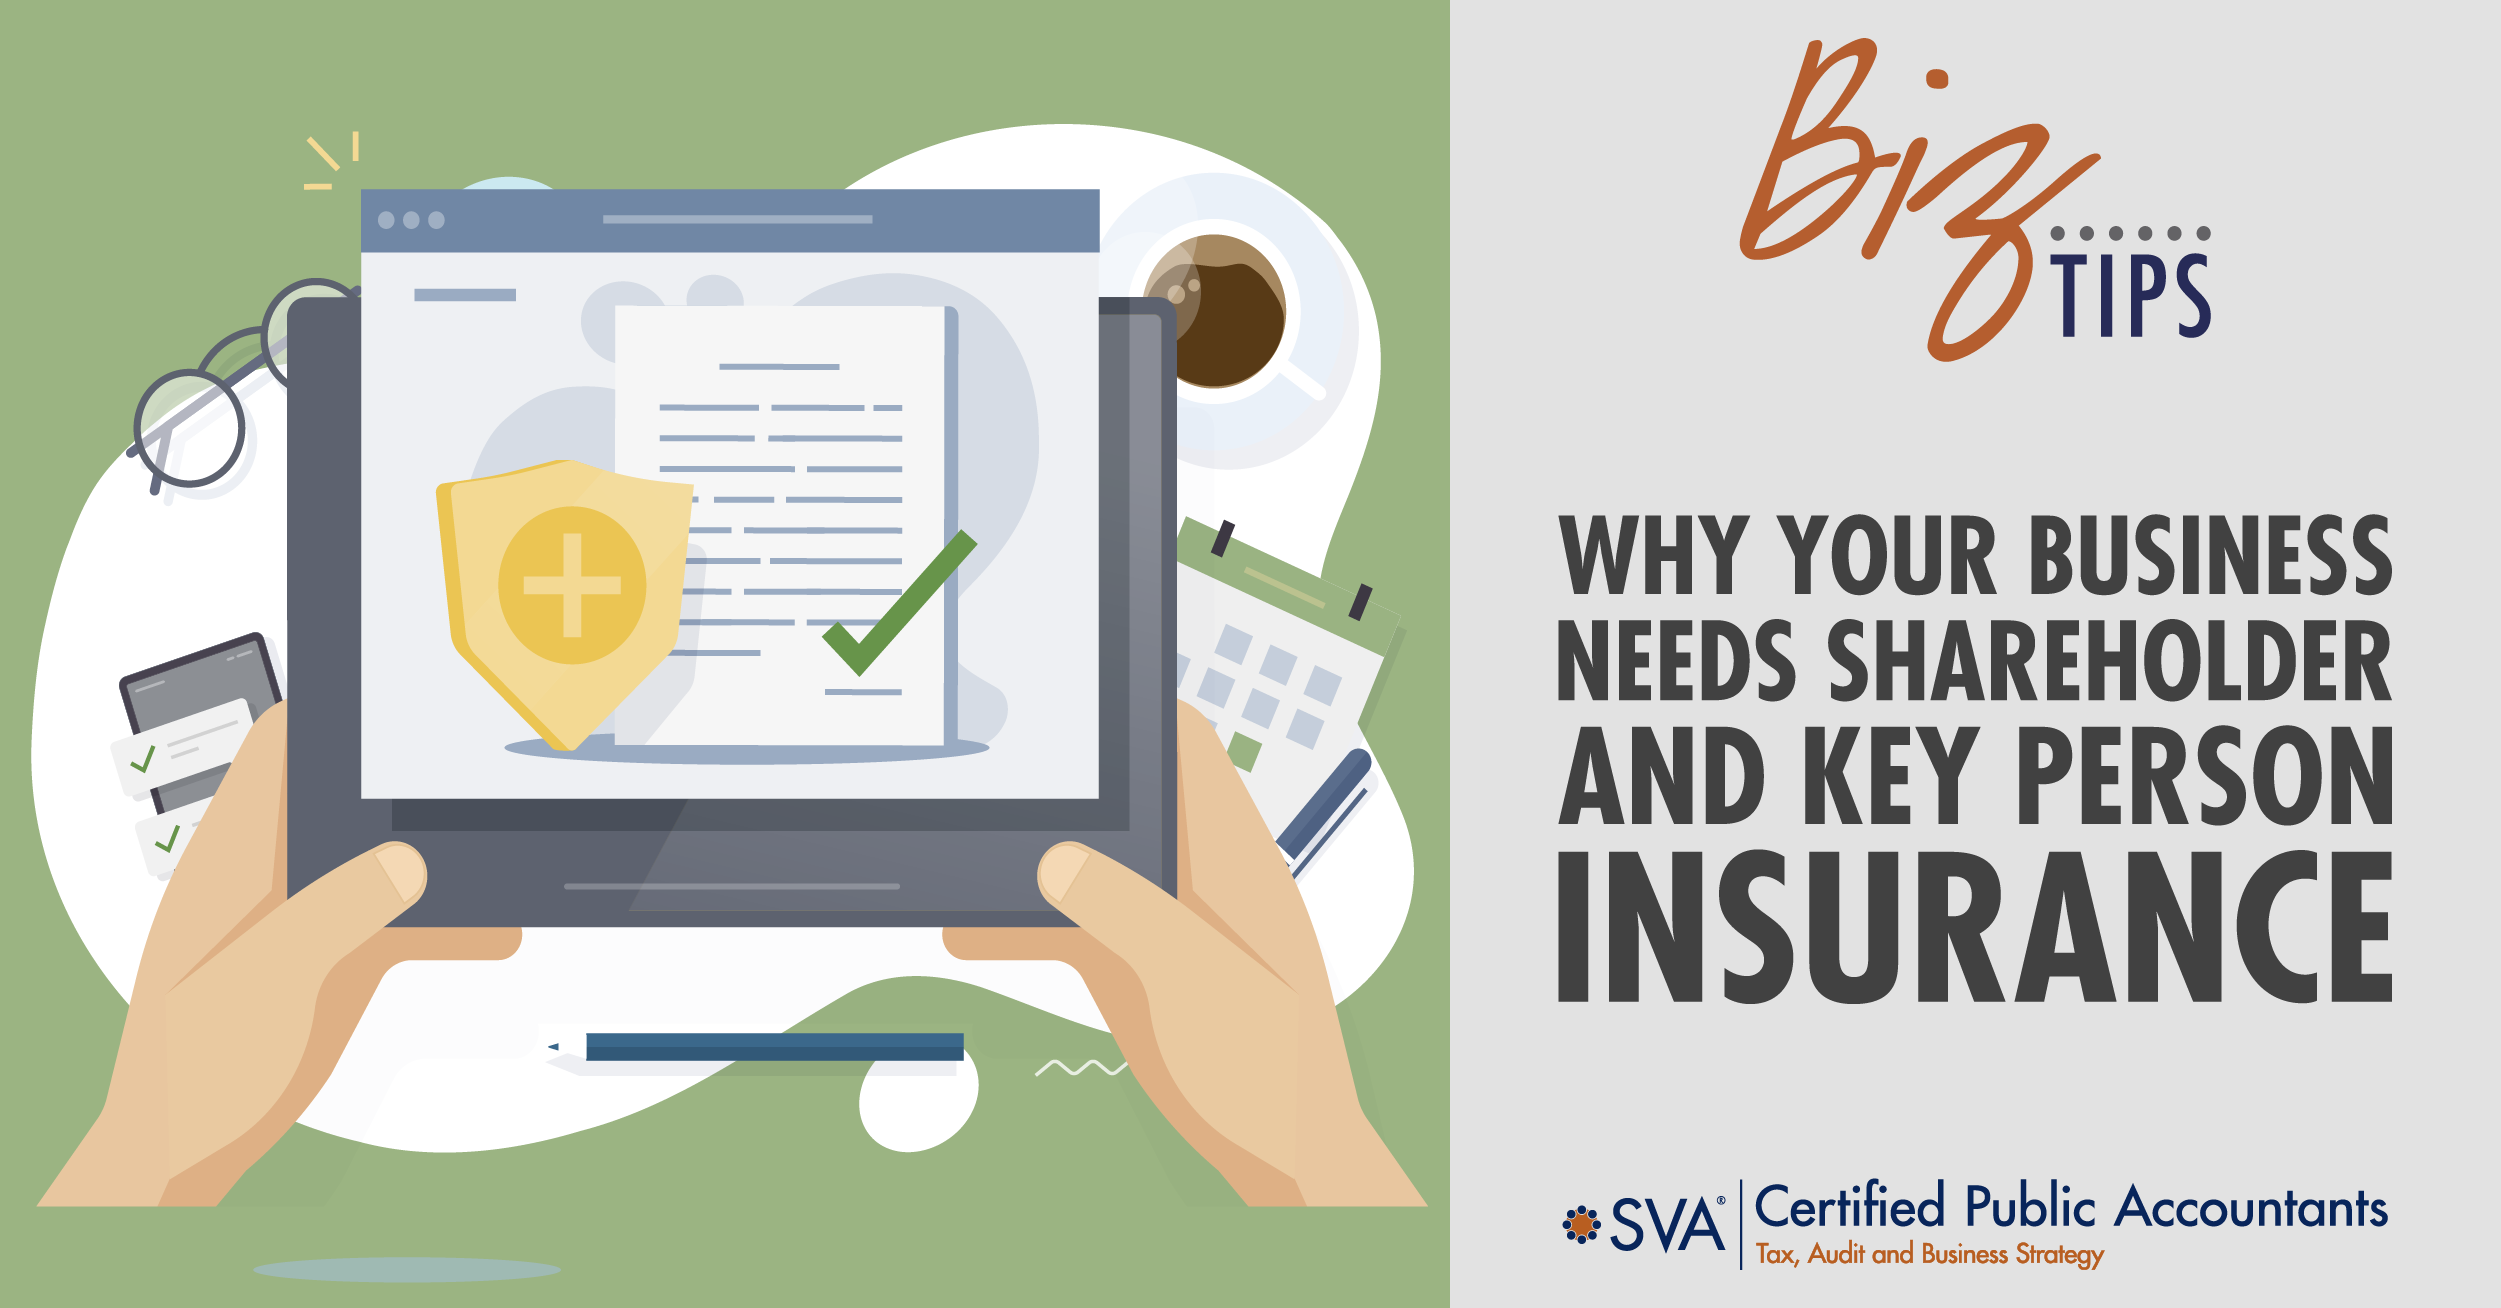 Why Your Business Needs Shareholder and Key Person Insurance